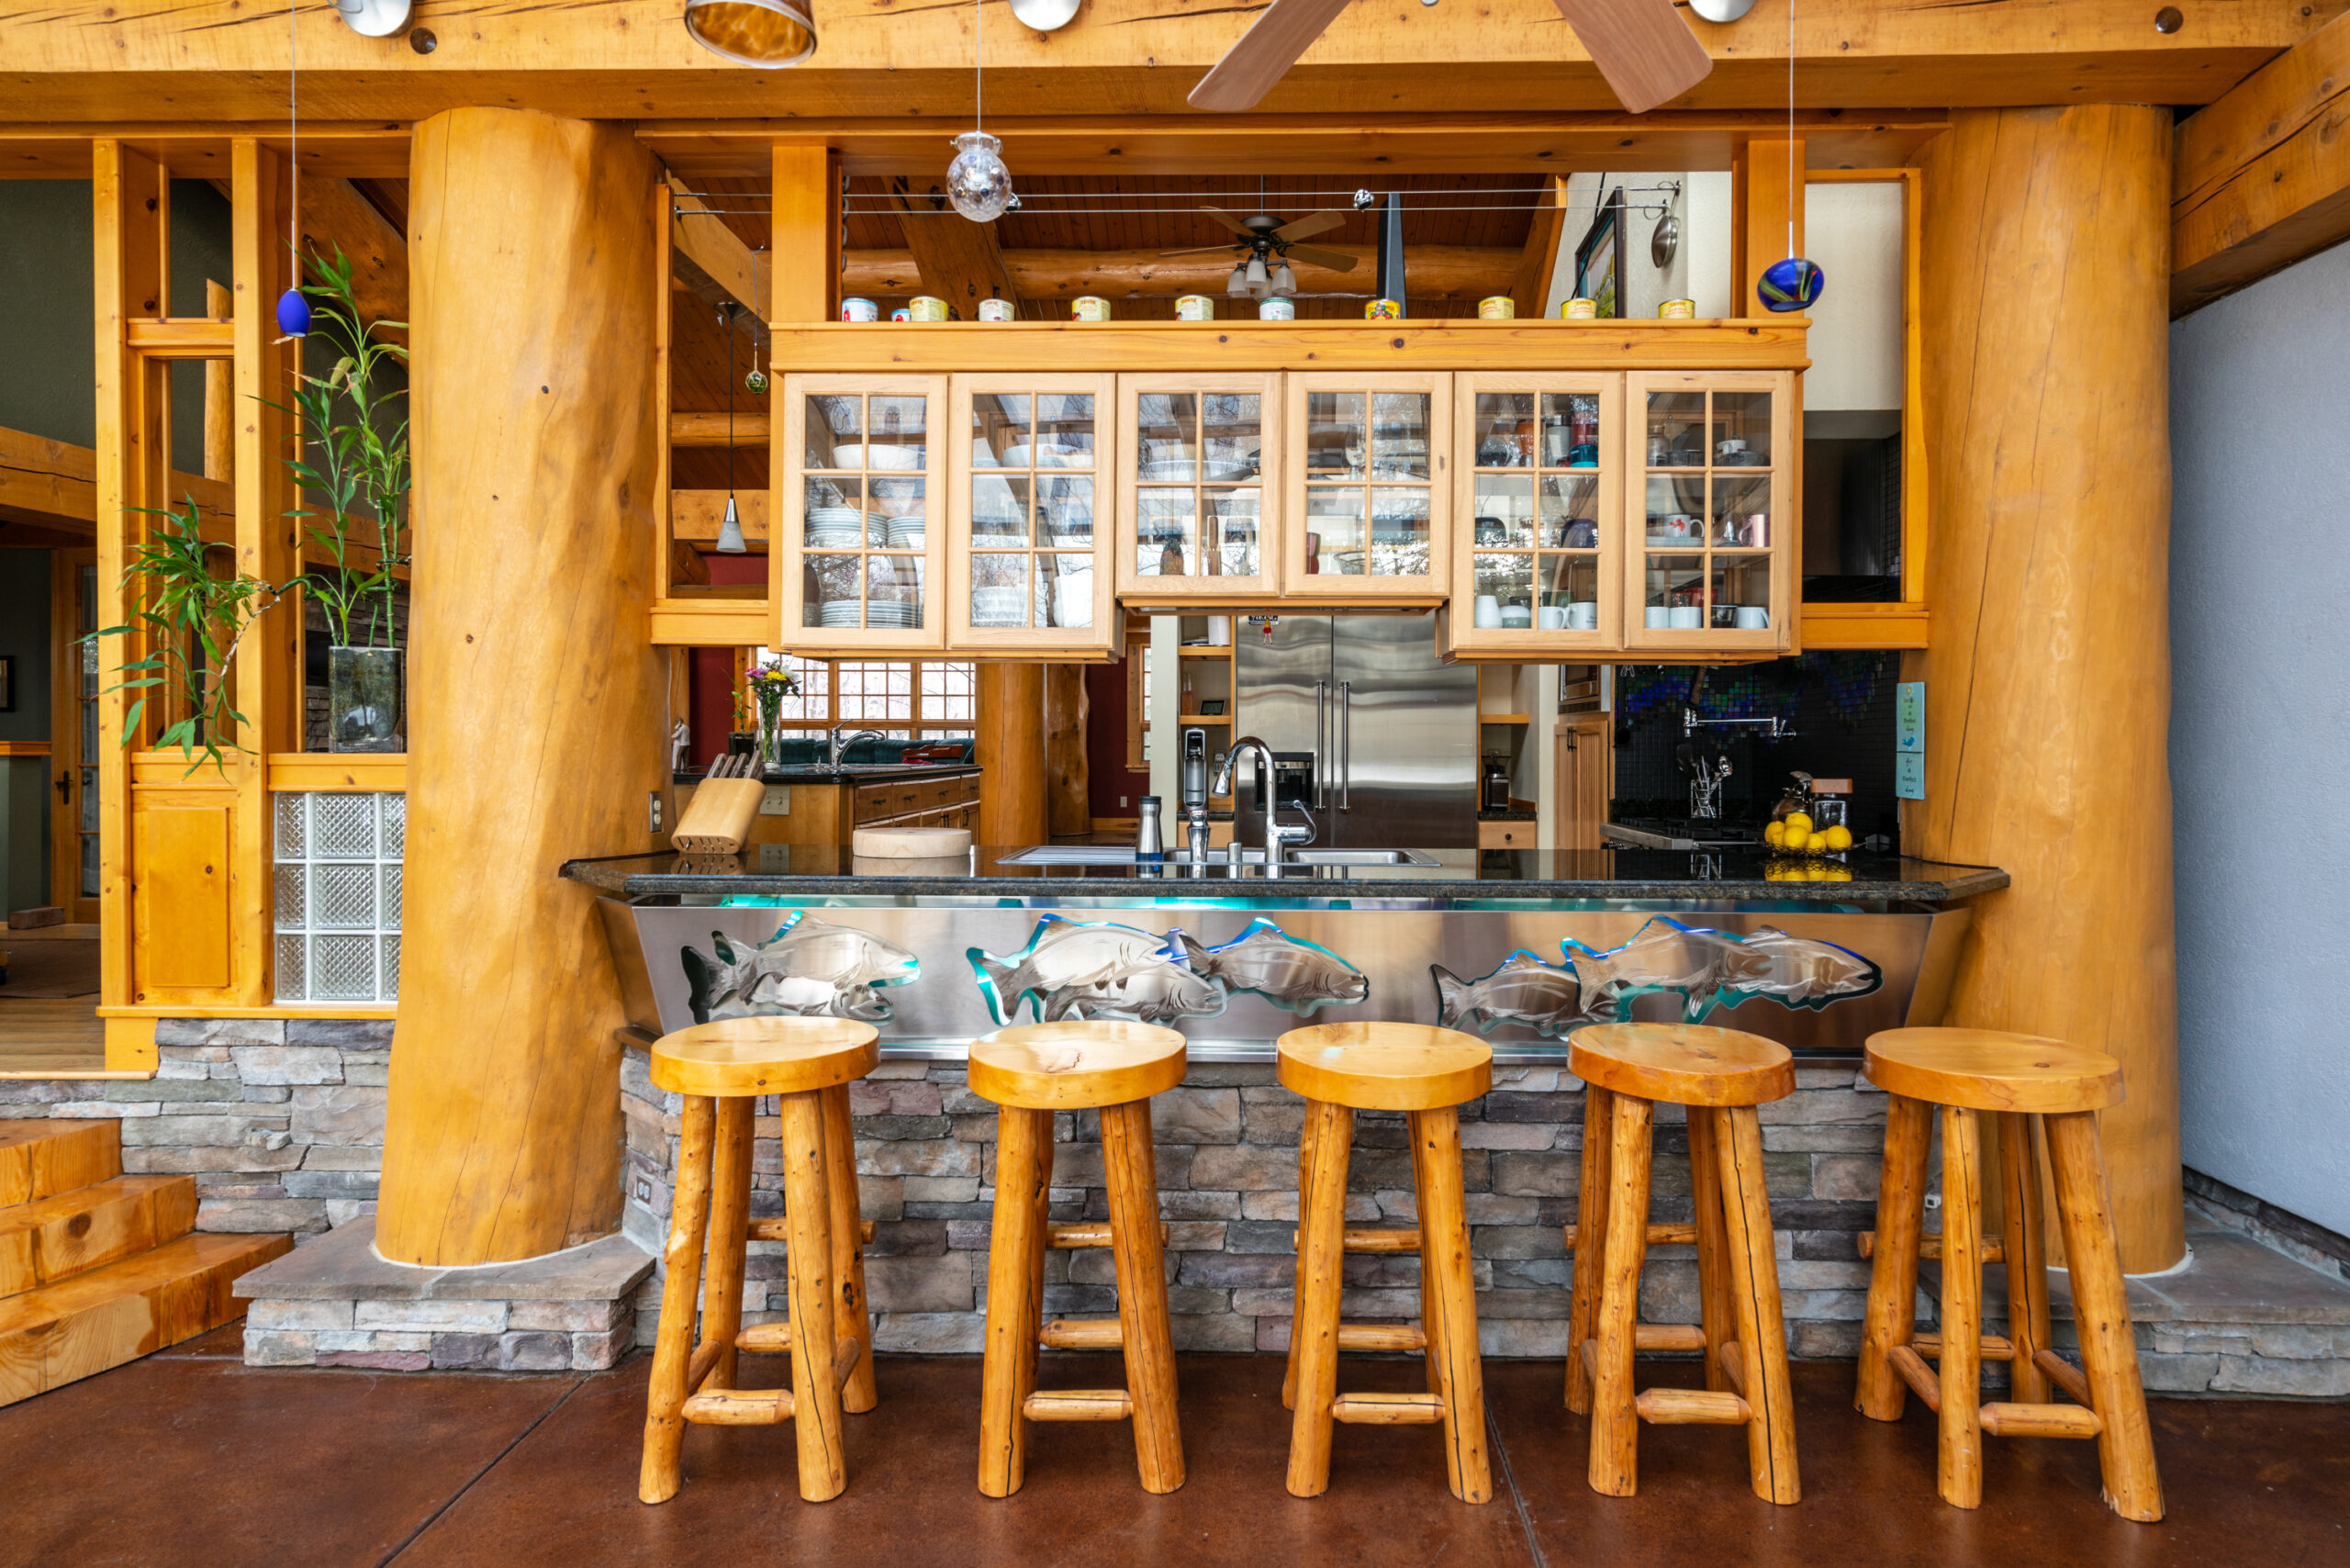 Breakfast bar and wooden stools inside rustic timber framed home.